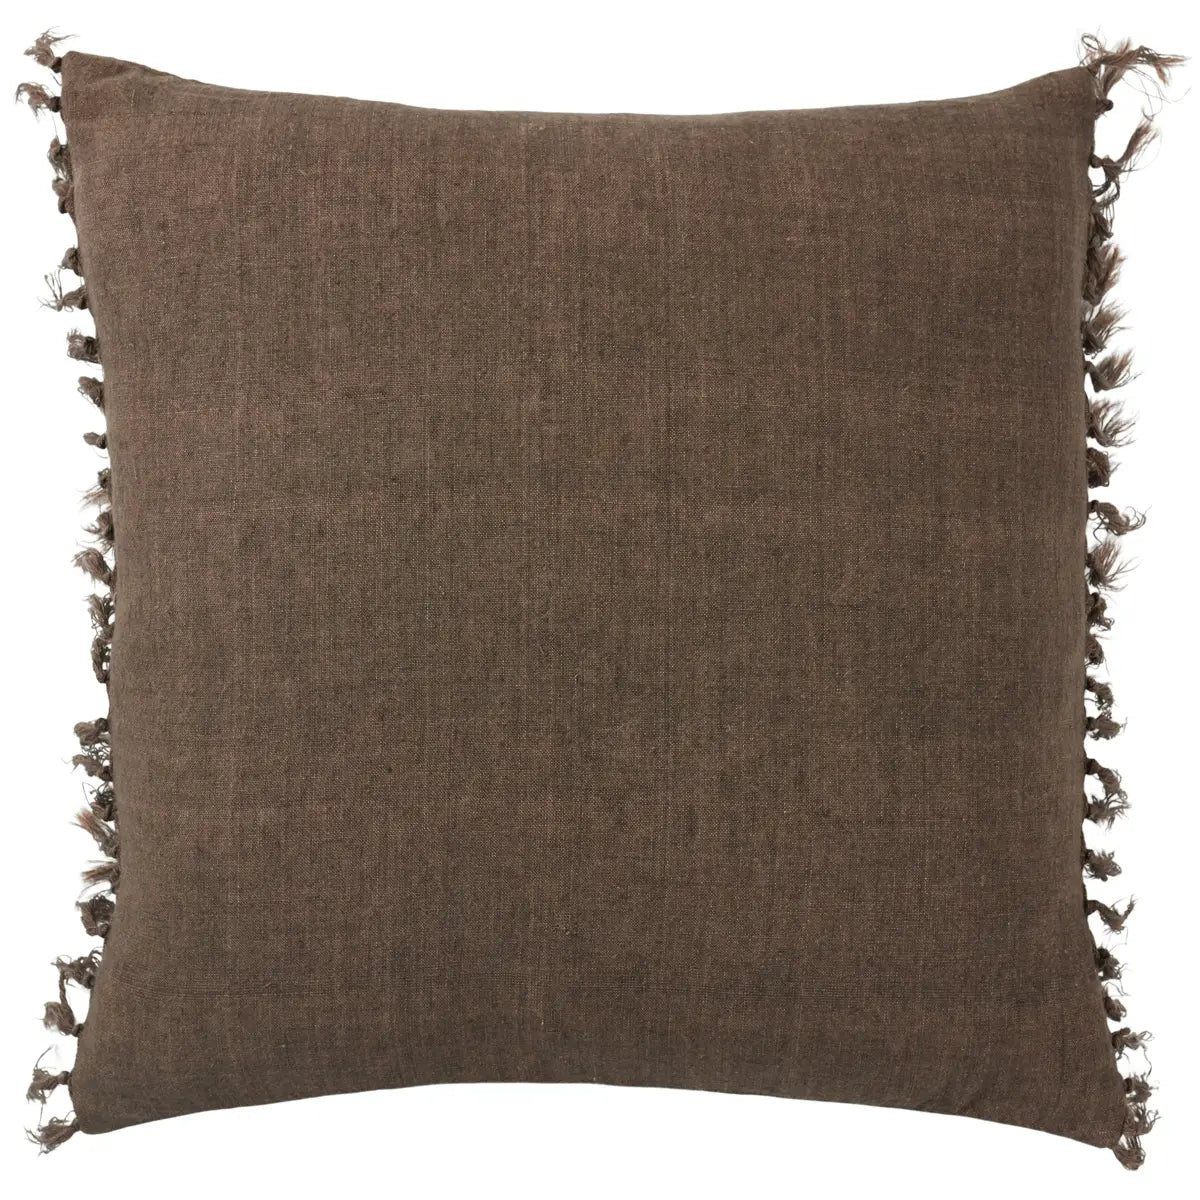 The Jemina Pinecone Pillow boasts an assortment of relaxed linen designs with rustic-style knotted tassels lining the sides. The comfortable Majere throw pillow delights with a cozy brown hue and subtle bohemian vibe that perfectly accents sofas, chairs, and beds alike. Amethyst Home provides interior design services, furniture, rugs, and lighting in the Kansas City metro area.